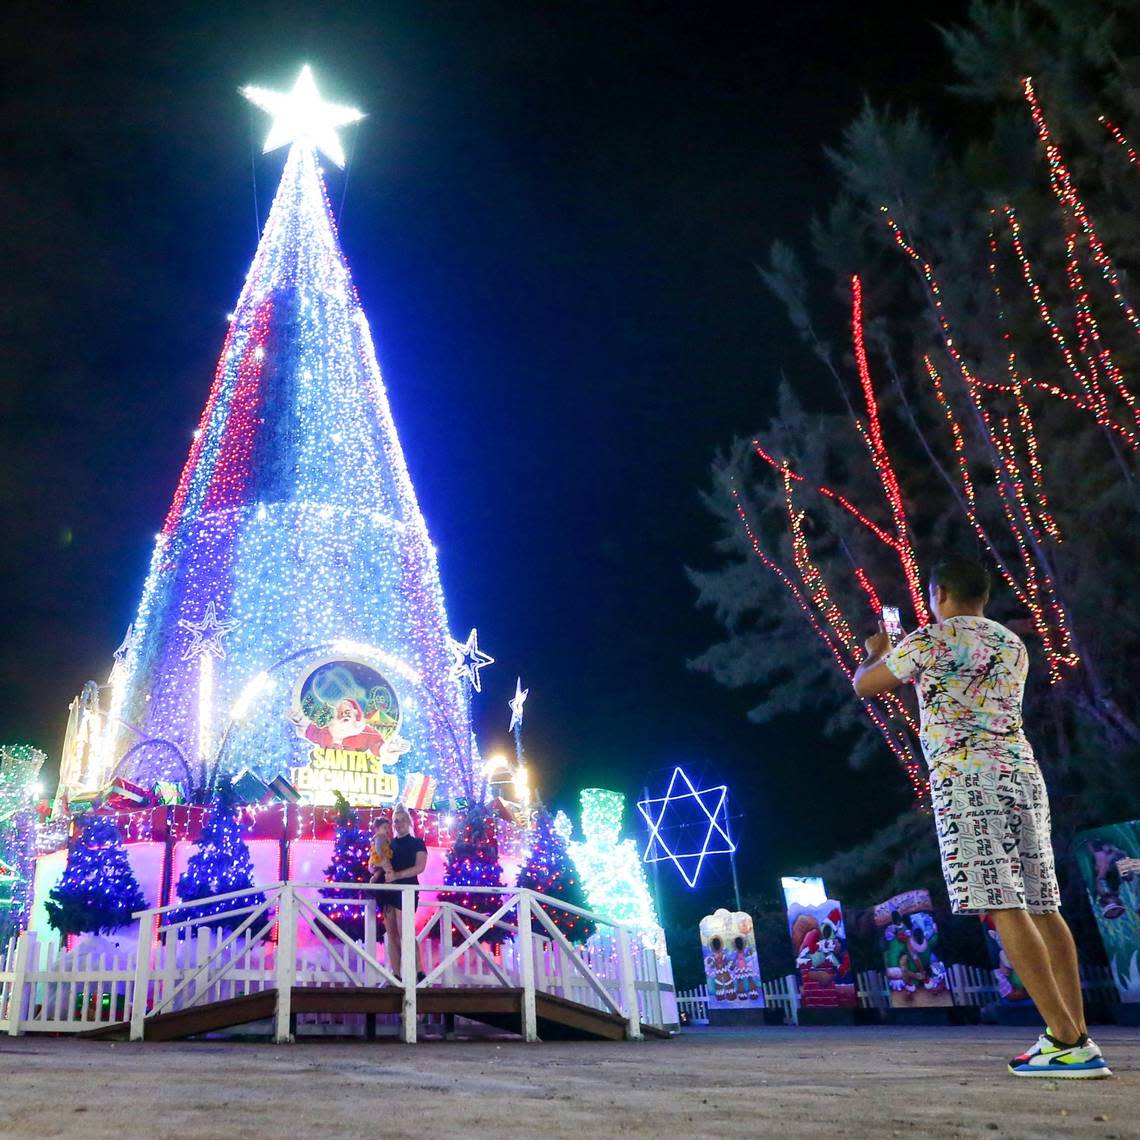 The giant Christmas tree is another signature attraction at Santa’s Enchanted Forest, which is leaving Hialeah Park. Daniel A. Varela/dvarela@miamiherald.com